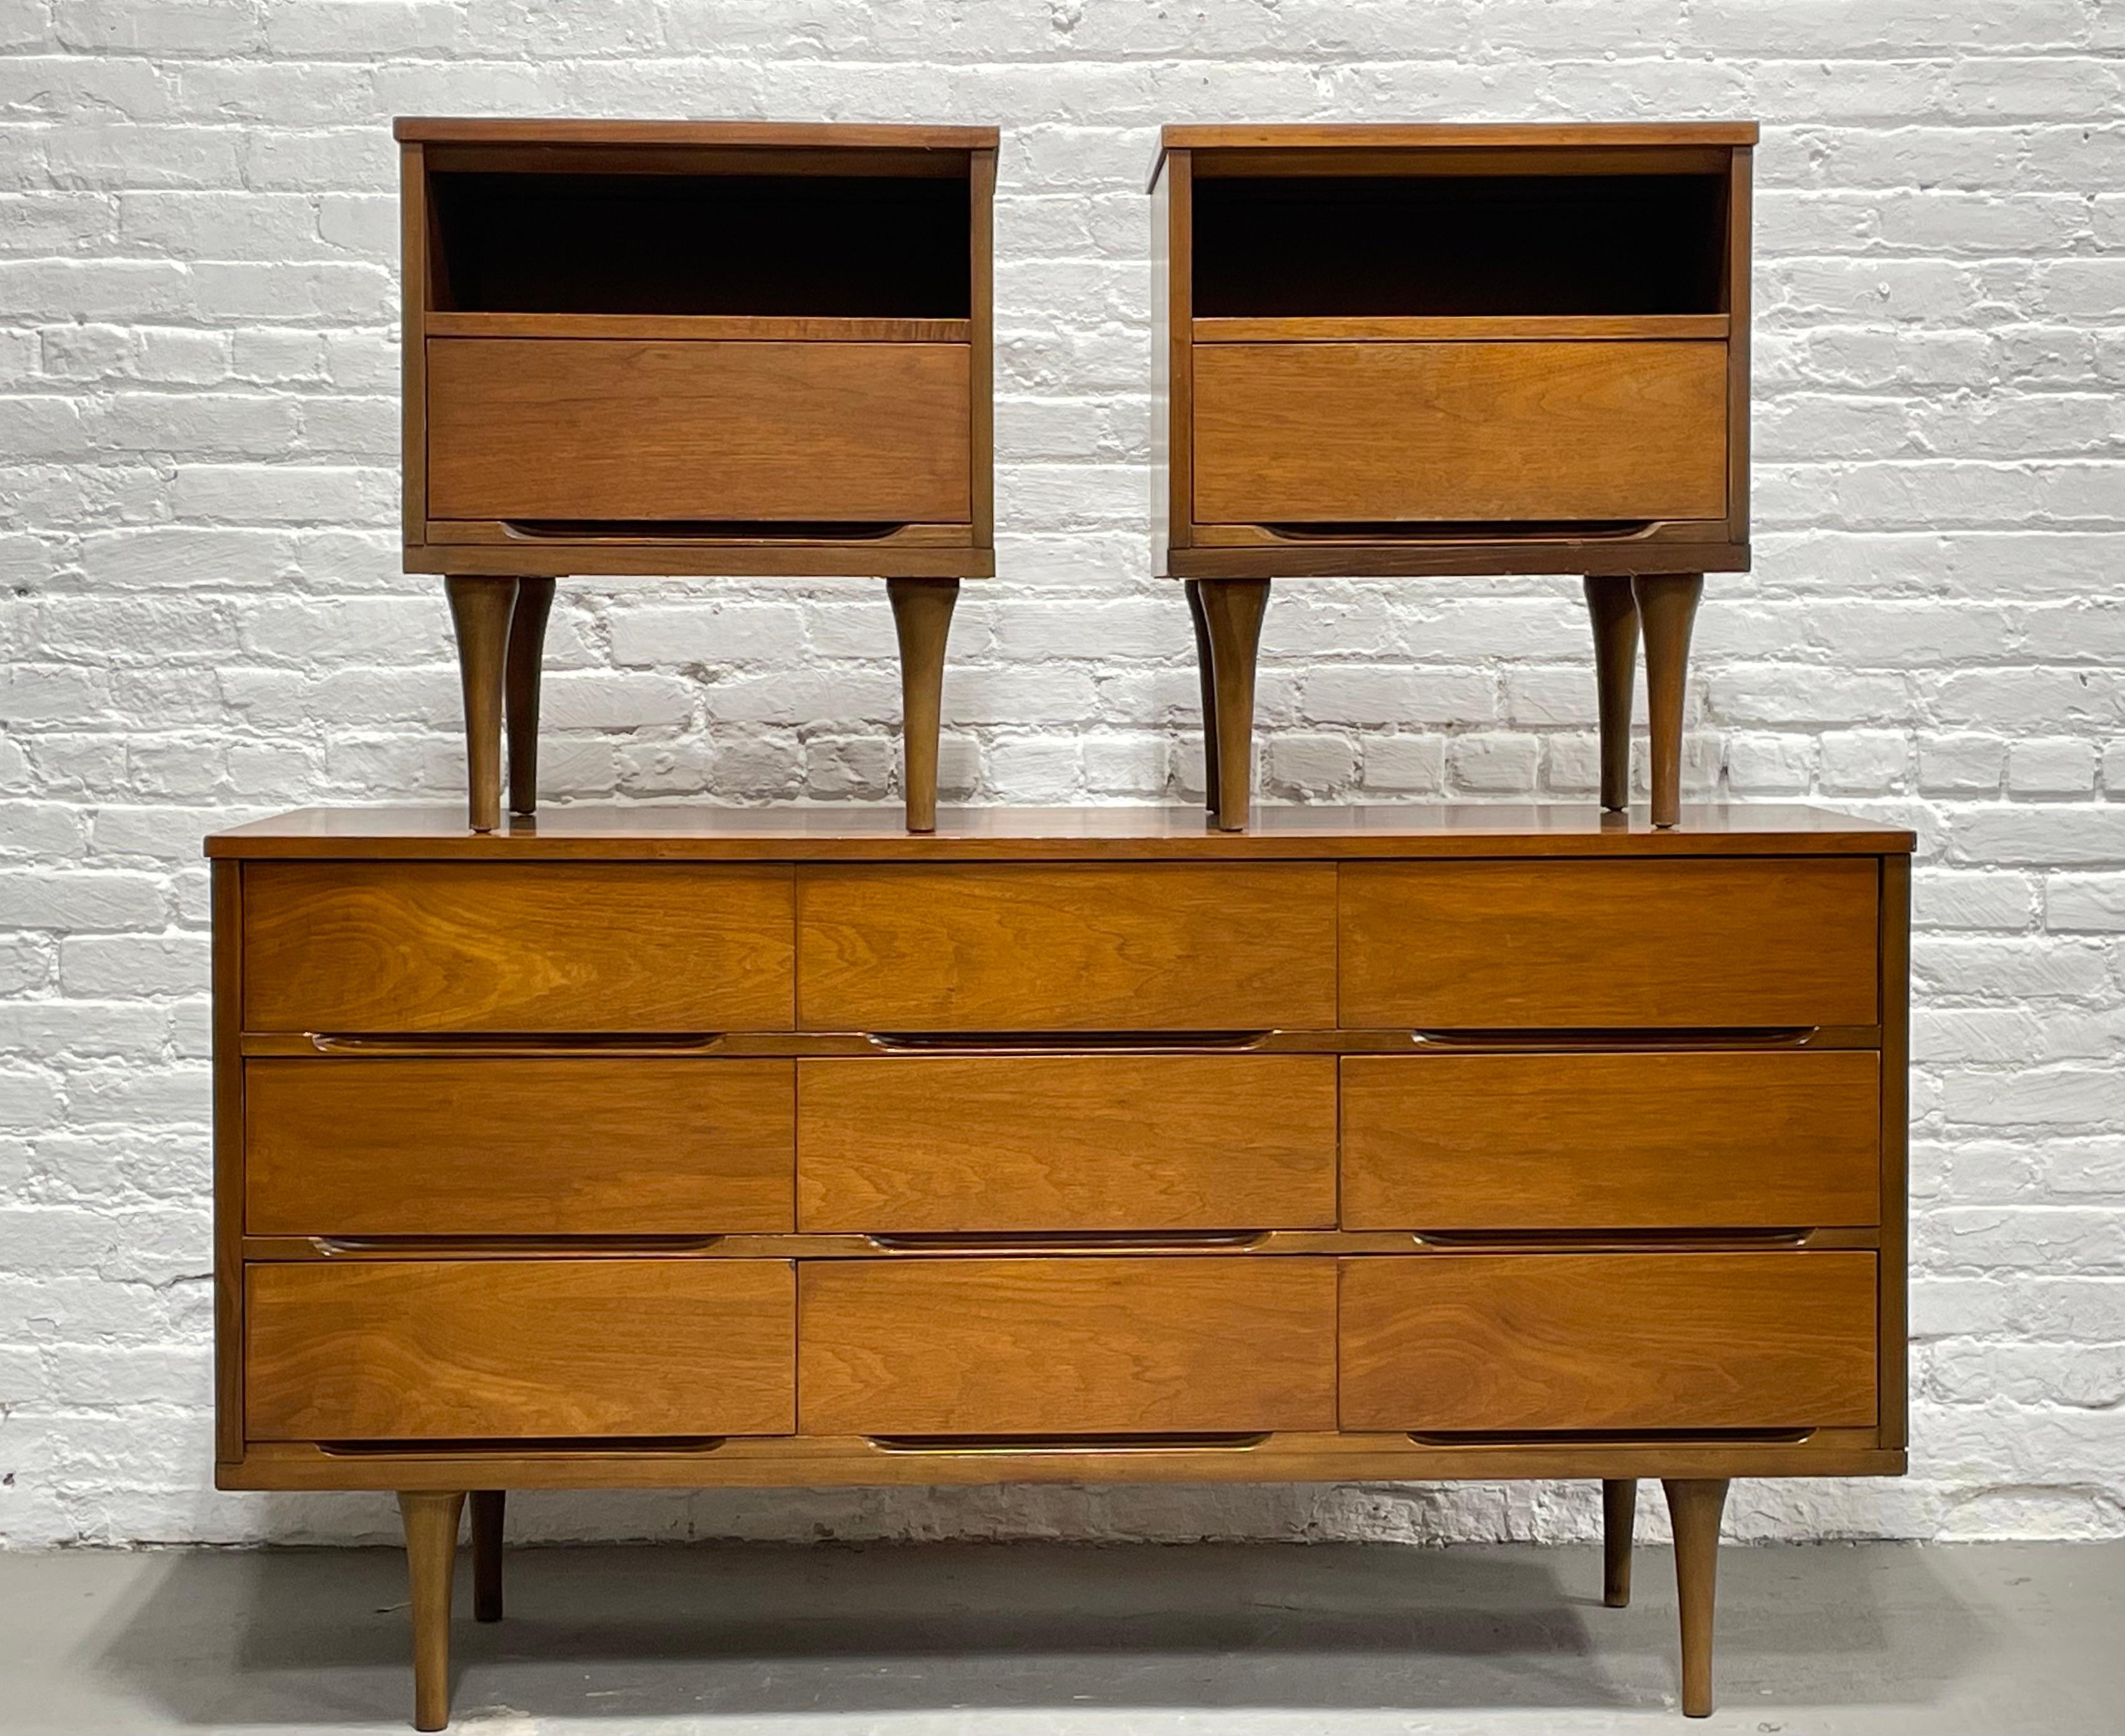 Mid-Century Modern bedroom set - long dresser / sideboard + nightstands, c. 1960s.

Clean + Simple Mid-Century Modern Walnut credenza / dresser with stunning wood grains, c. 1960s. Long tapered legs and a wealth of storage space offered among its